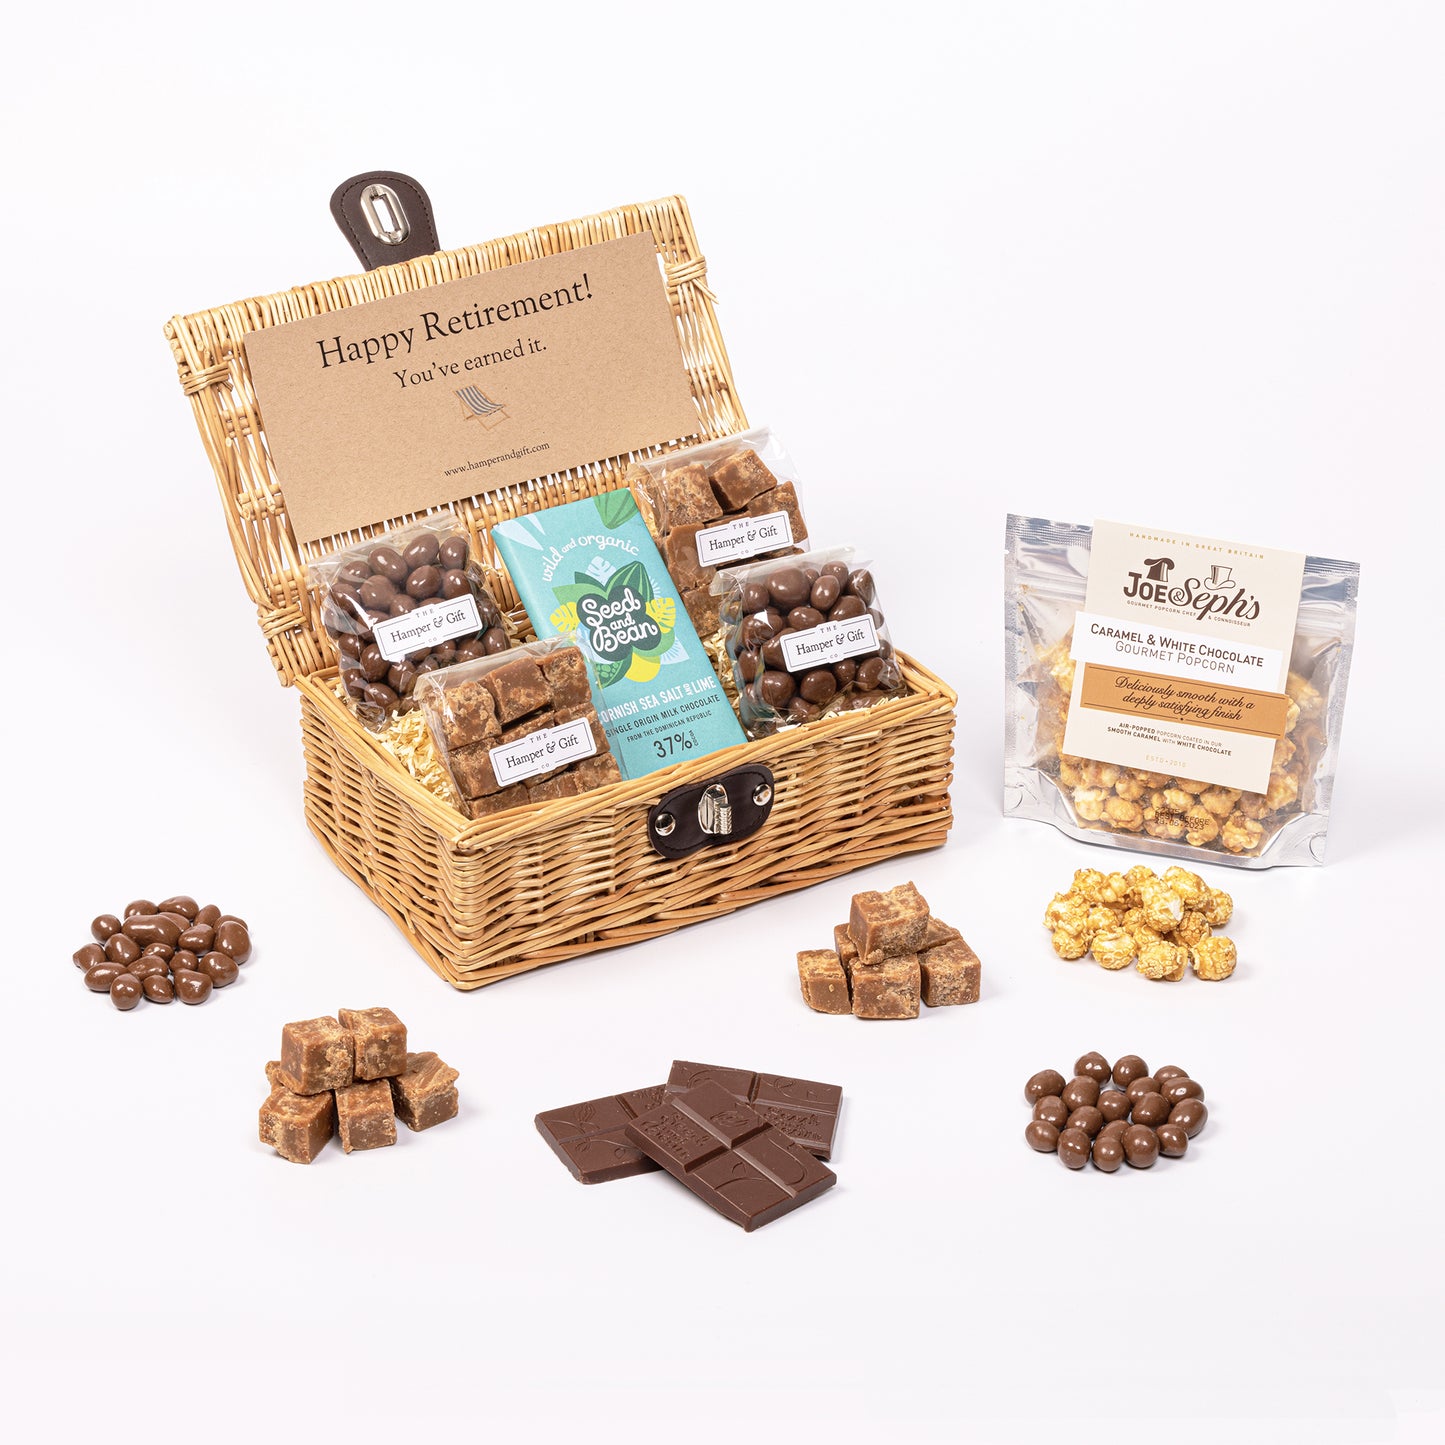 Little Retirement Hamper filled with chocolate, fudge and gourmet popcorn